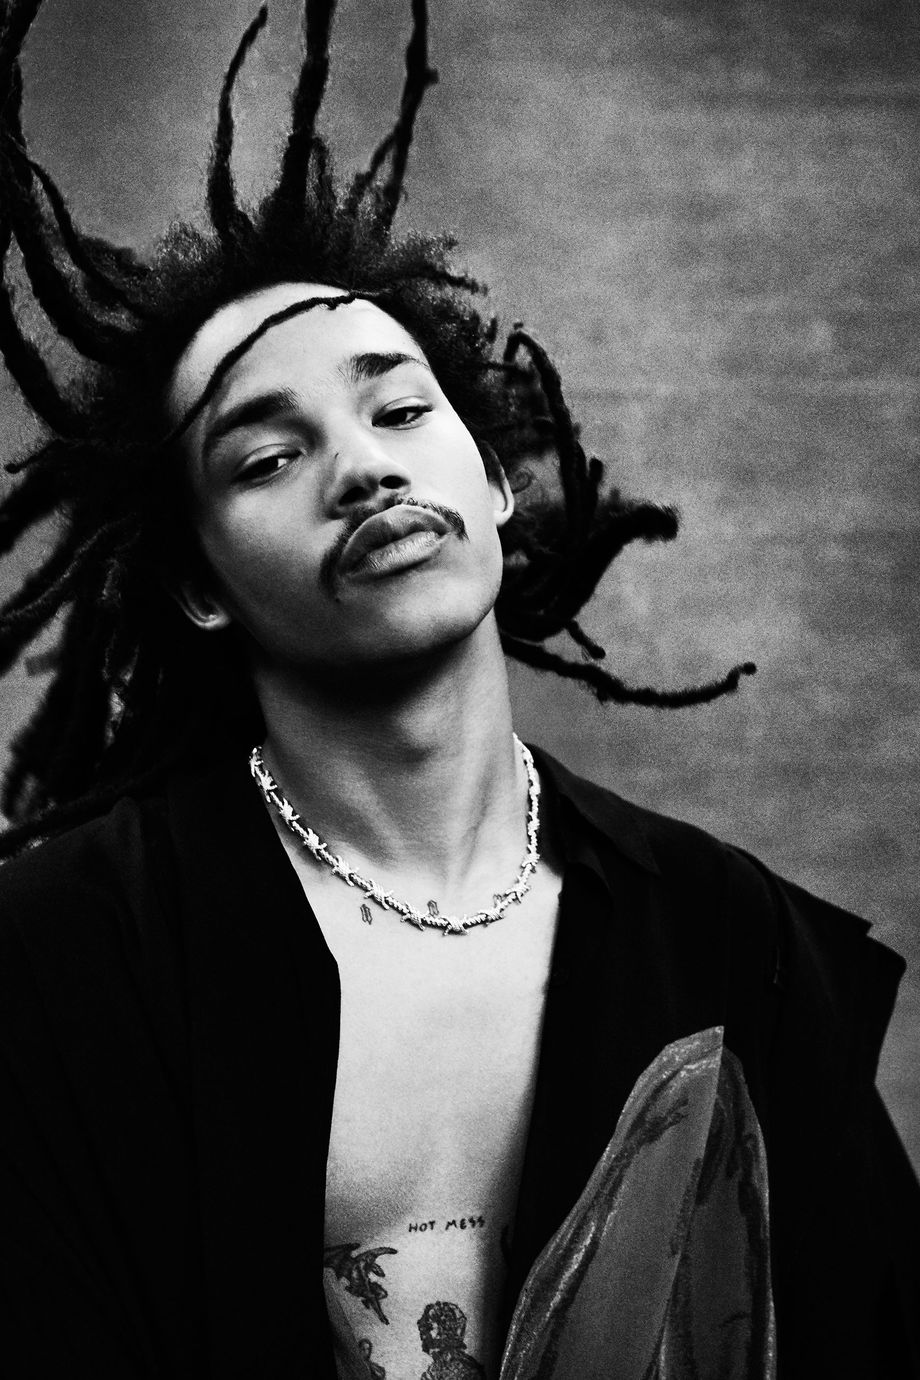 Luka Sabbat teams up with Champion for their 100th anniversary and